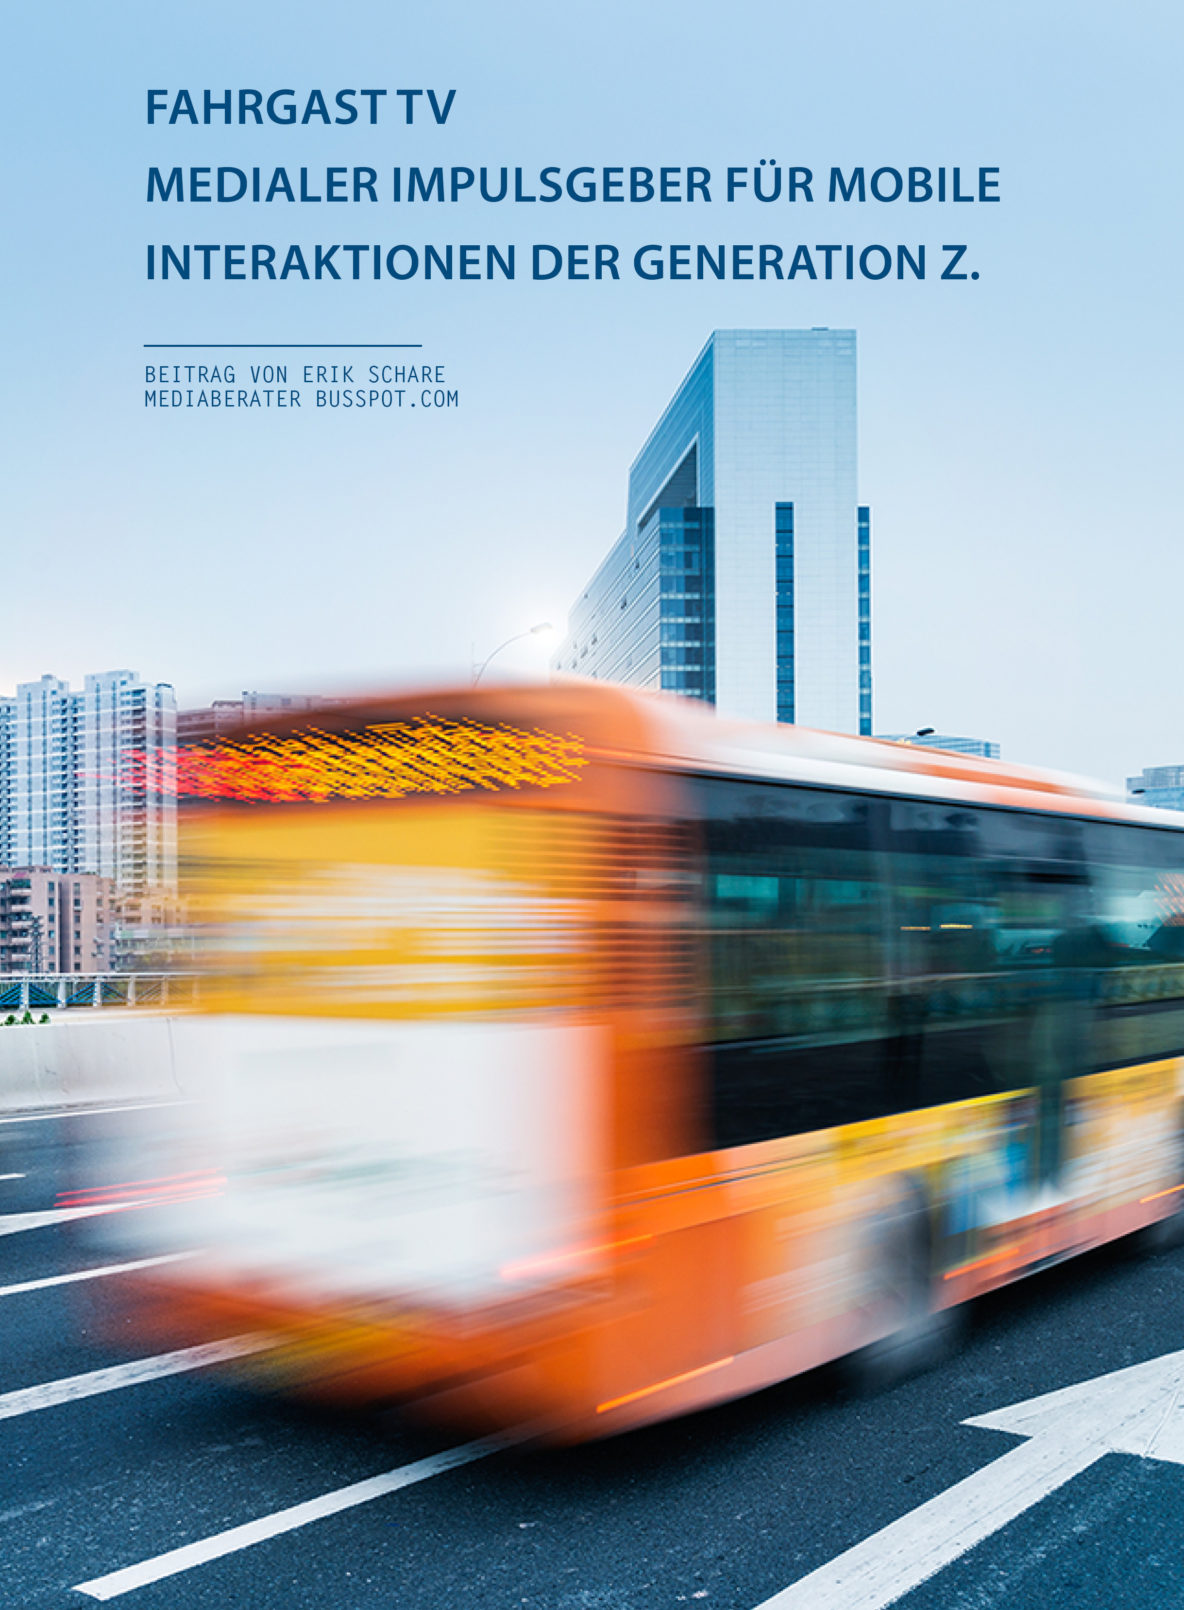 FACTS Ausgabe 3-2016, Out-of-Home Media, Ambient Media, #Transport